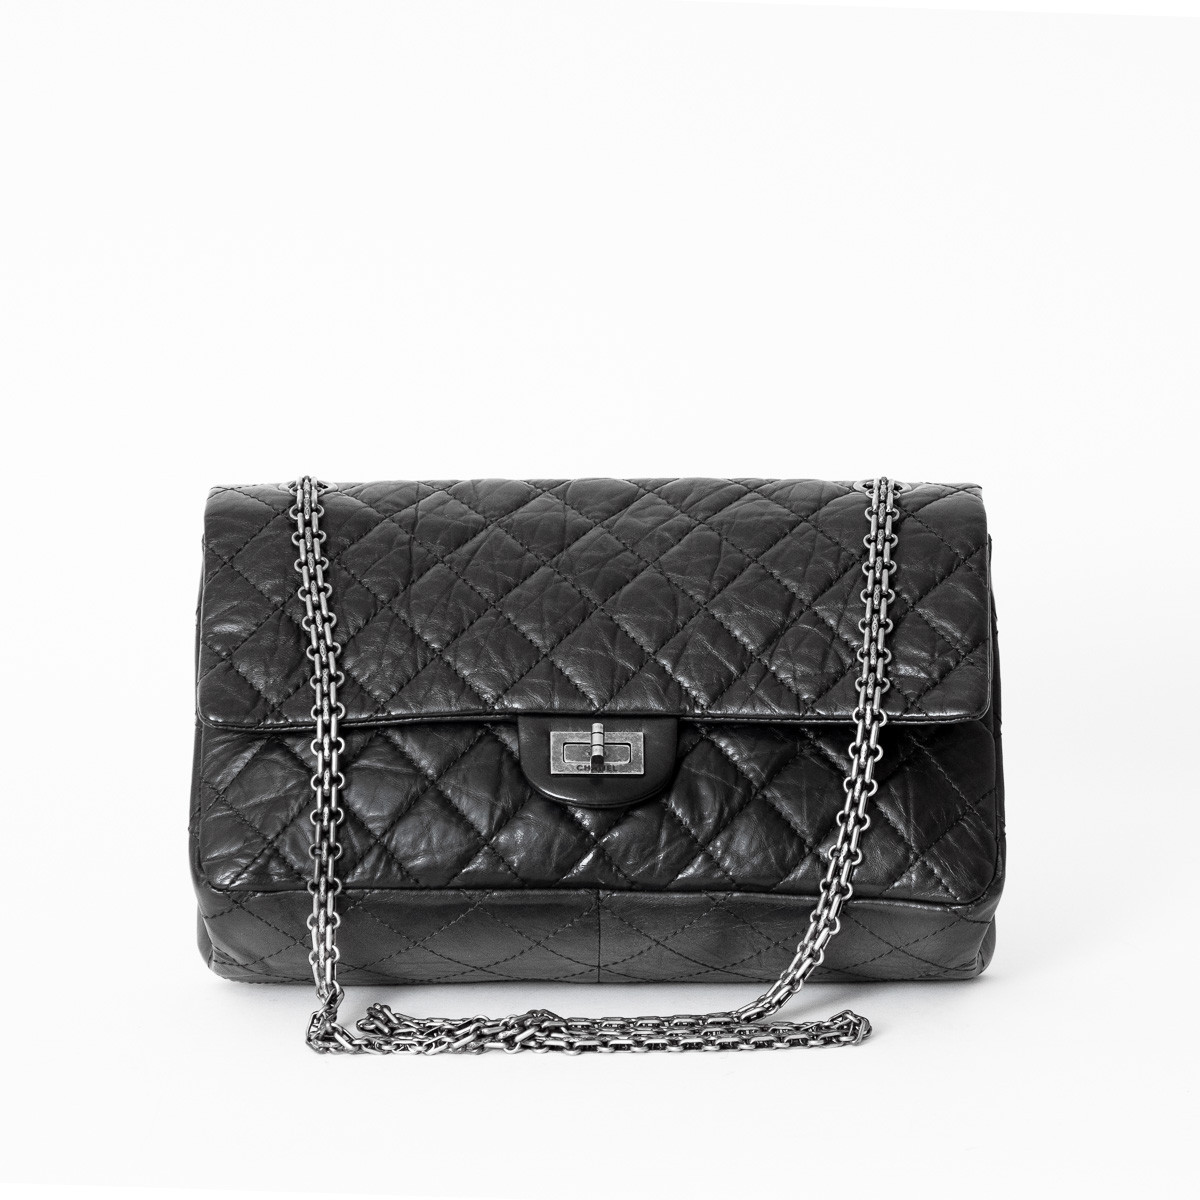 Chanel Metallic Teal 2.55 Reissue Double Flap 224 Bag – The Closet